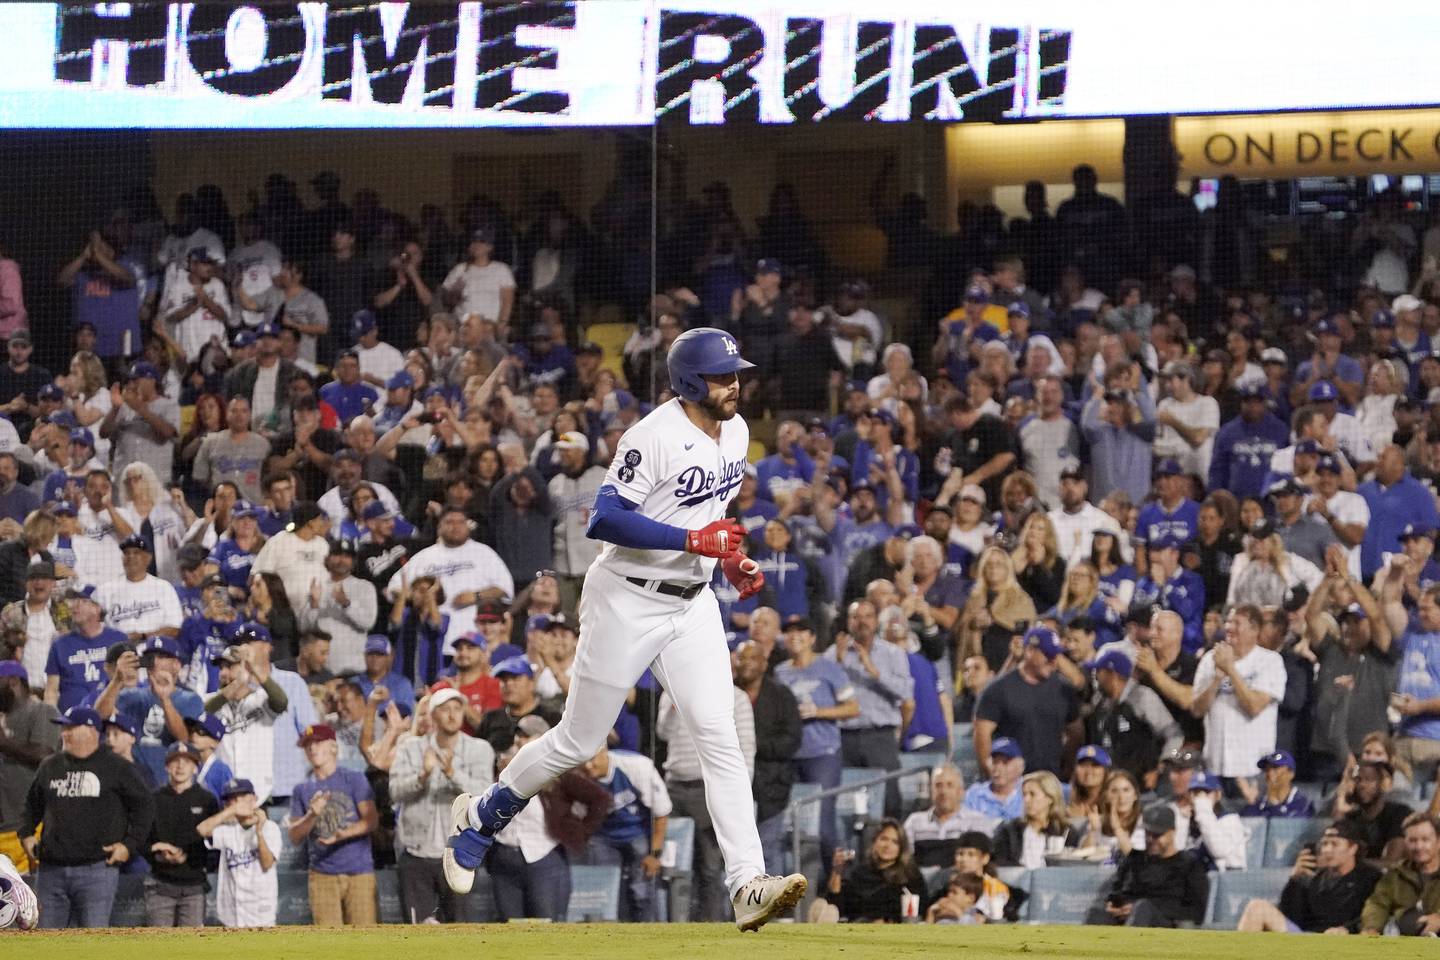 The Dodgers' Joey Gallo heads back to the dugout after hitting a solo home run during the fifth inning against the Rockies on Oct. 4, 2022.